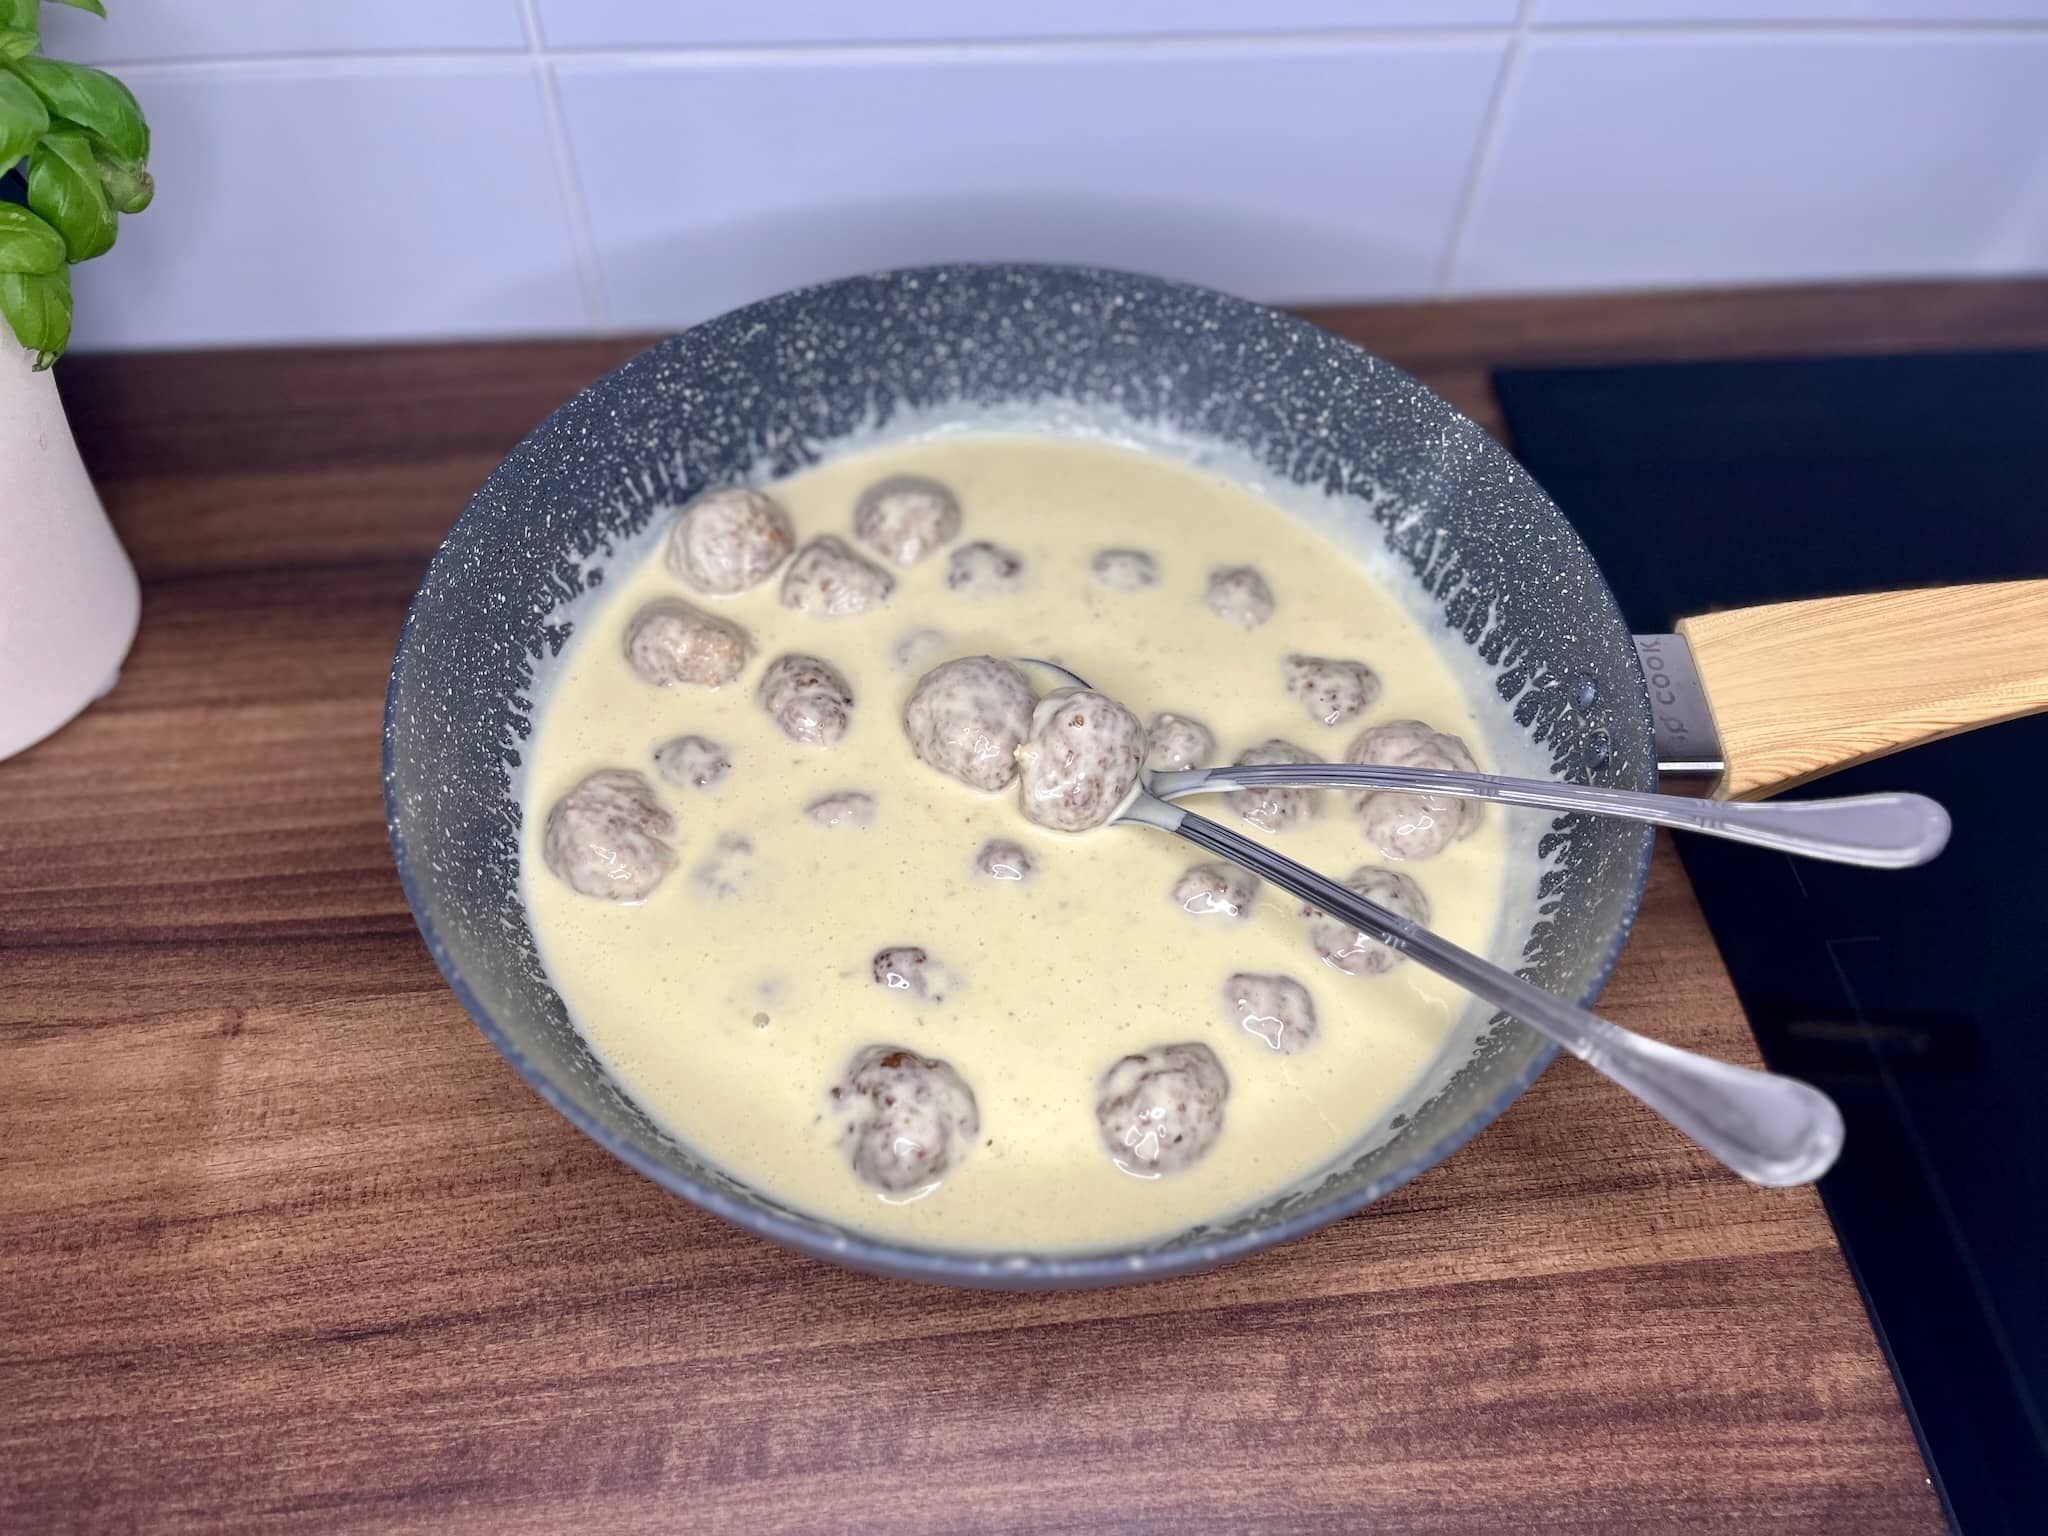 The baked meatballs are gently folded into the creamy sauce